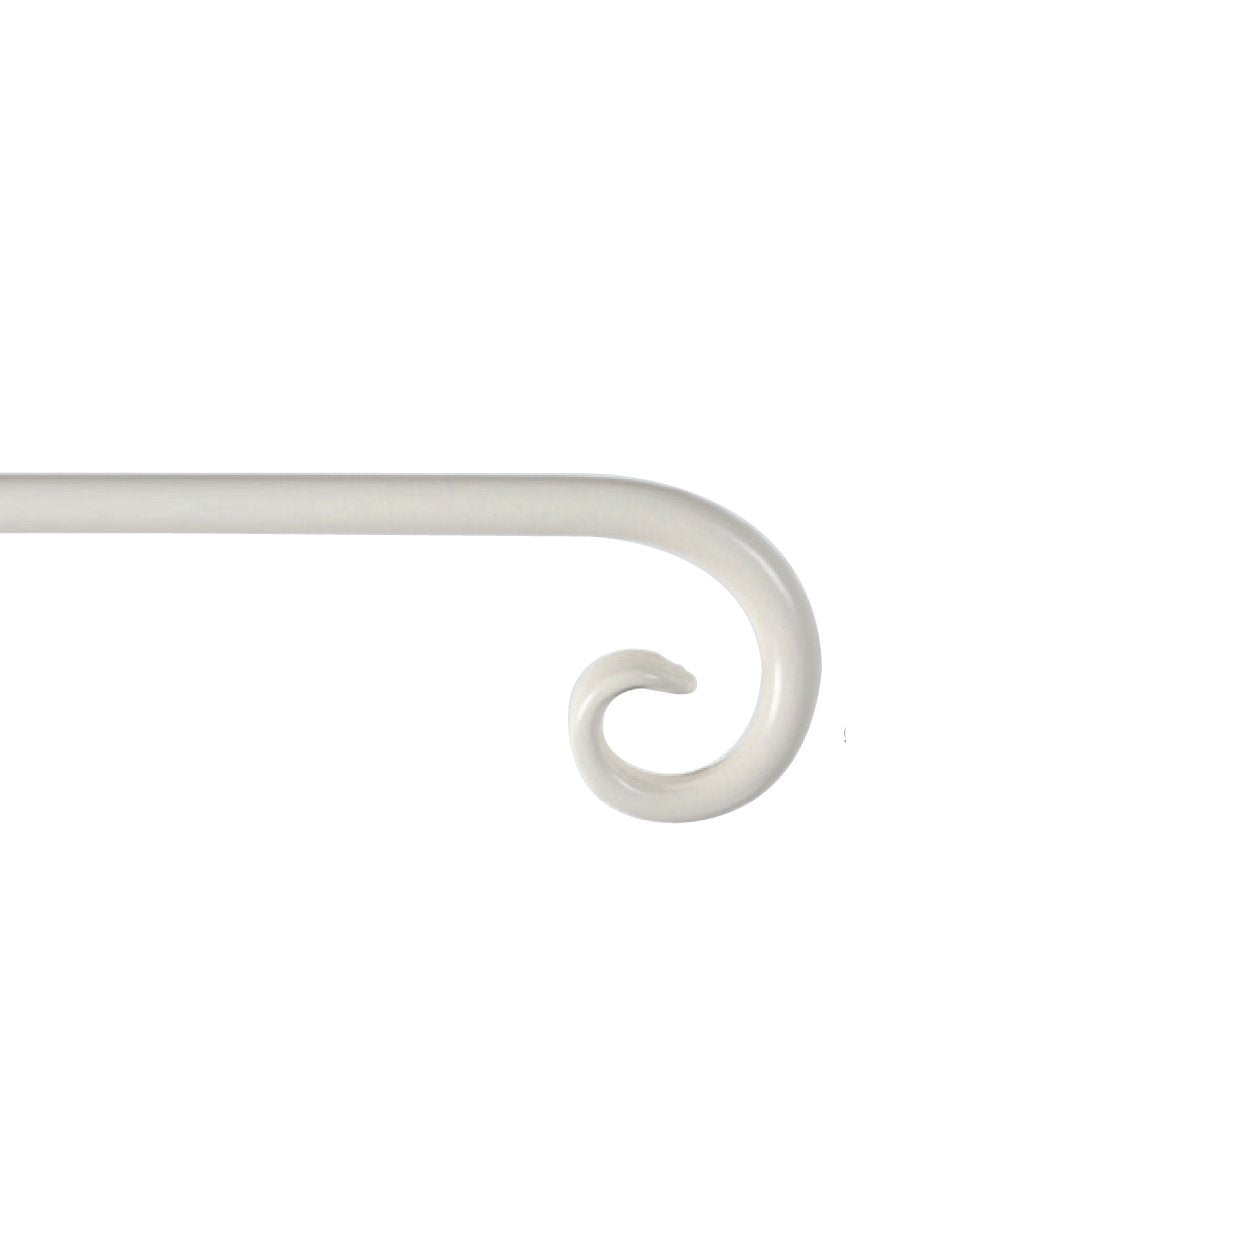 chalk wrought iron curl finial by Cameron Fuller